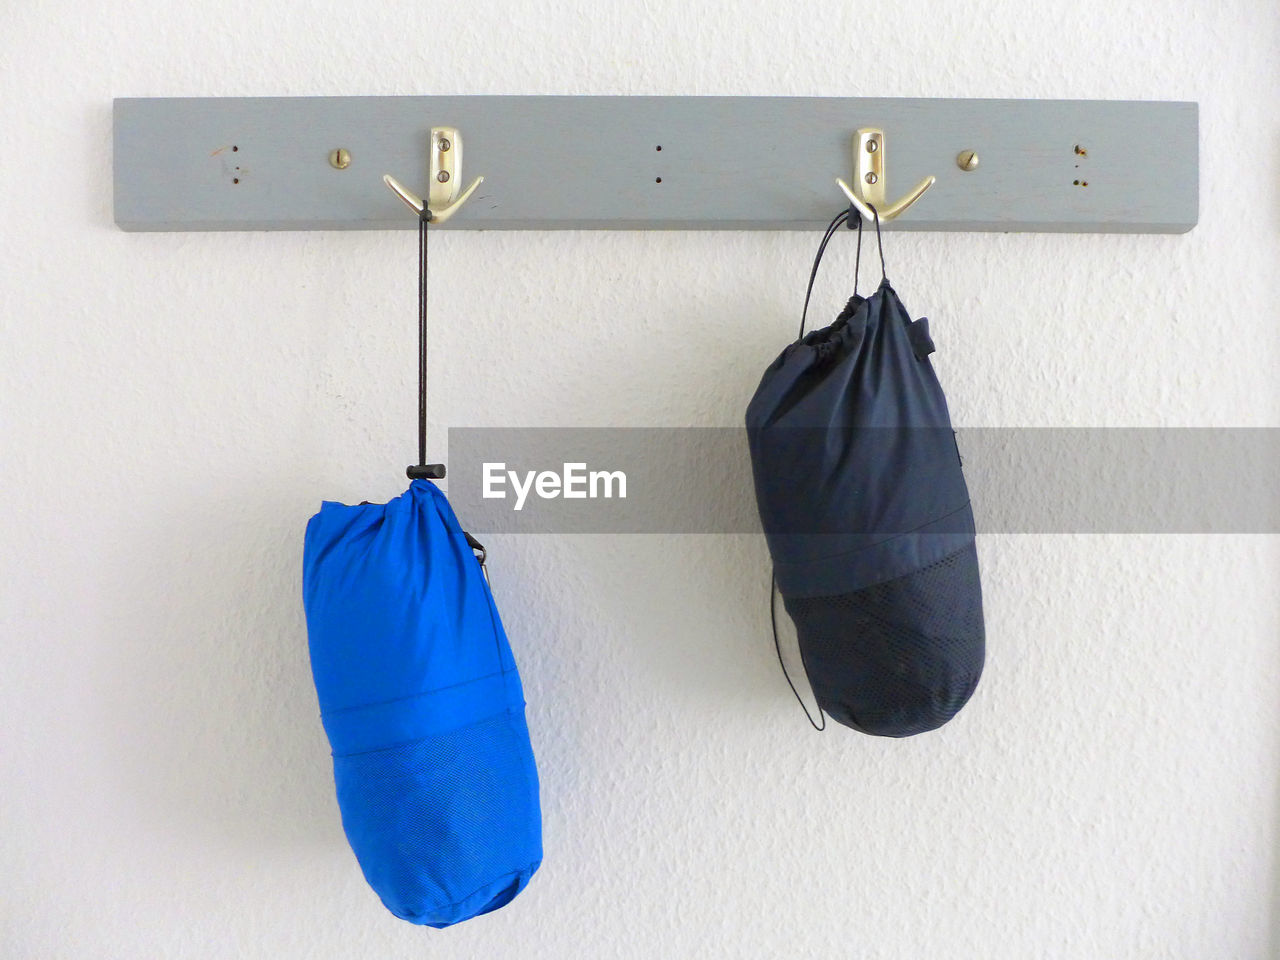 Boxing bags hanging on hooks against wall at home